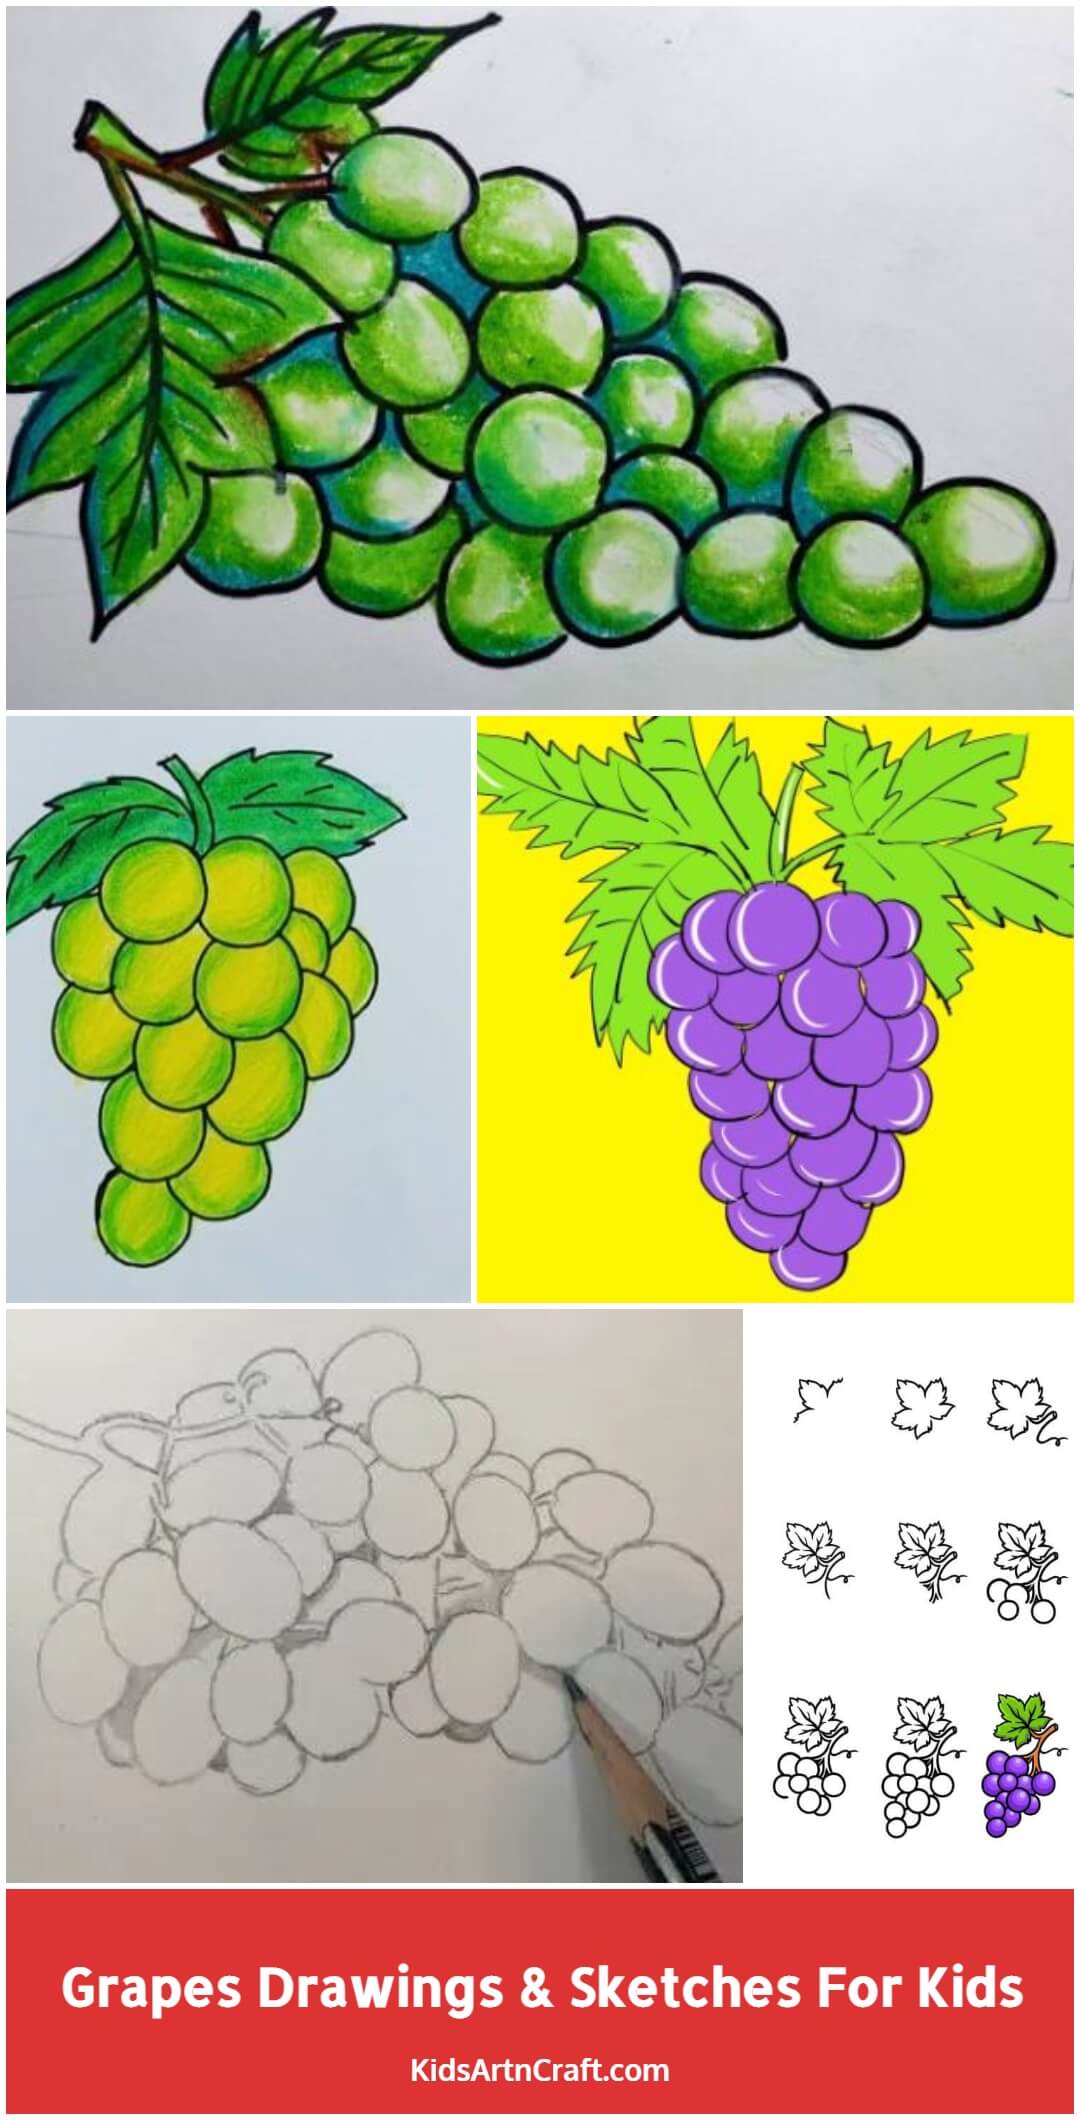 How to Draw Grapes Step by Step  EasyLineDrawing